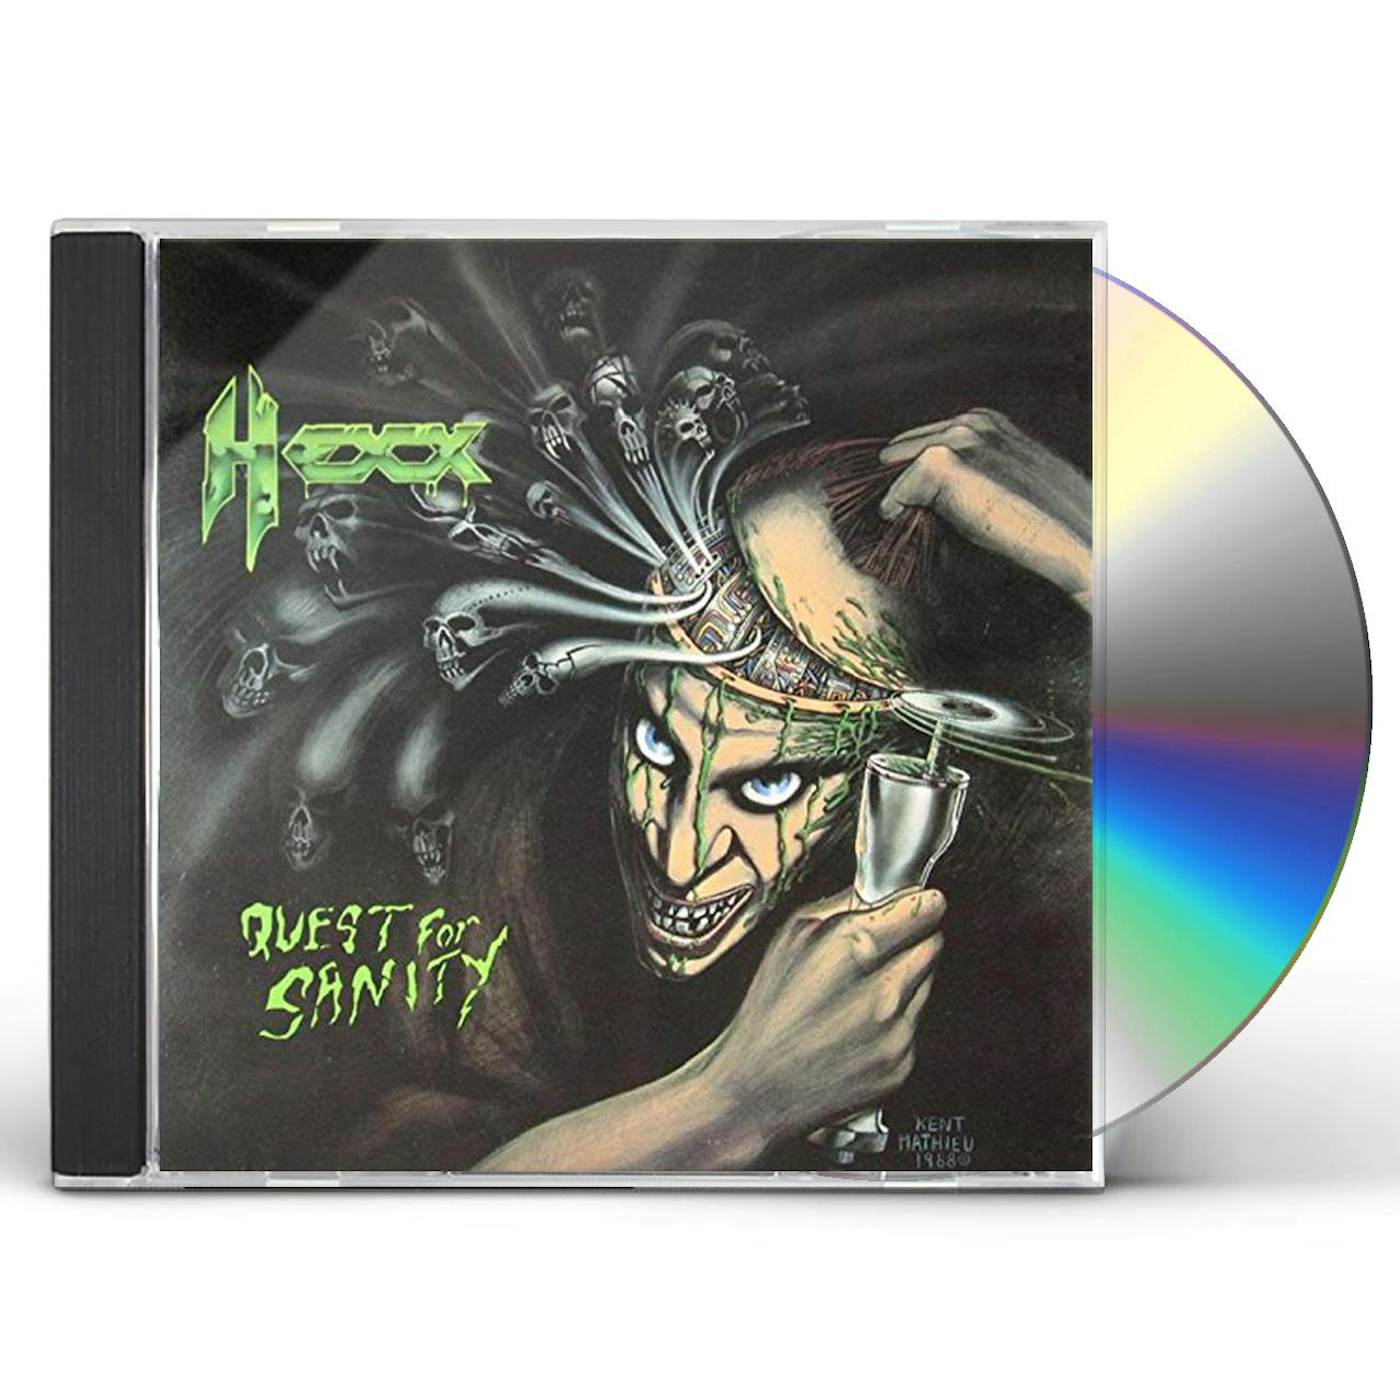 Hexx QUEST FOR SANITY & WATERY GRAVES CD